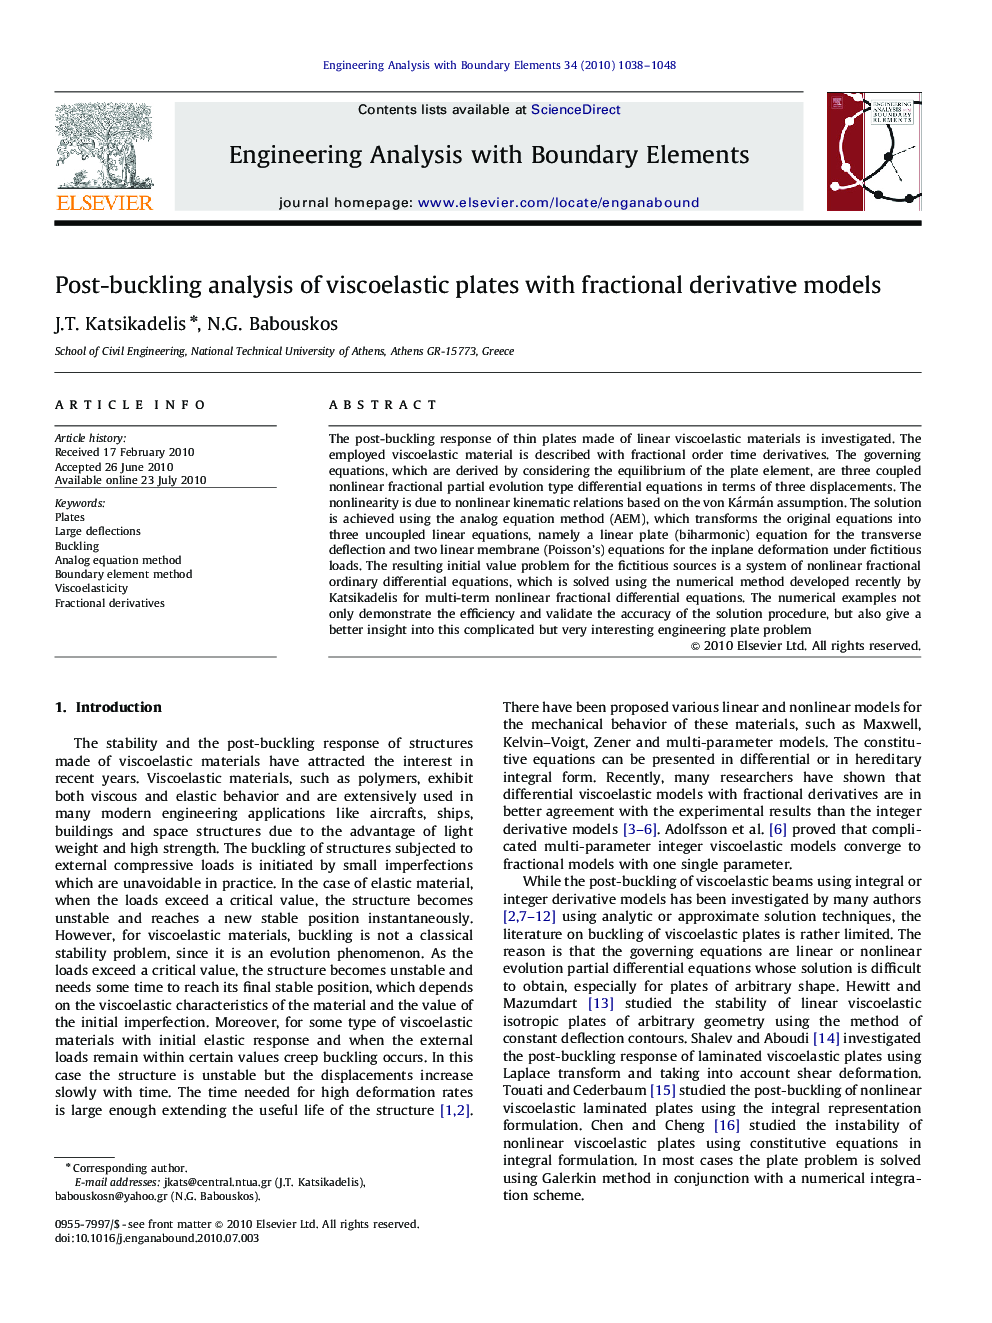 Post-buckling analysis of viscoelastic plates with fractional derivative models